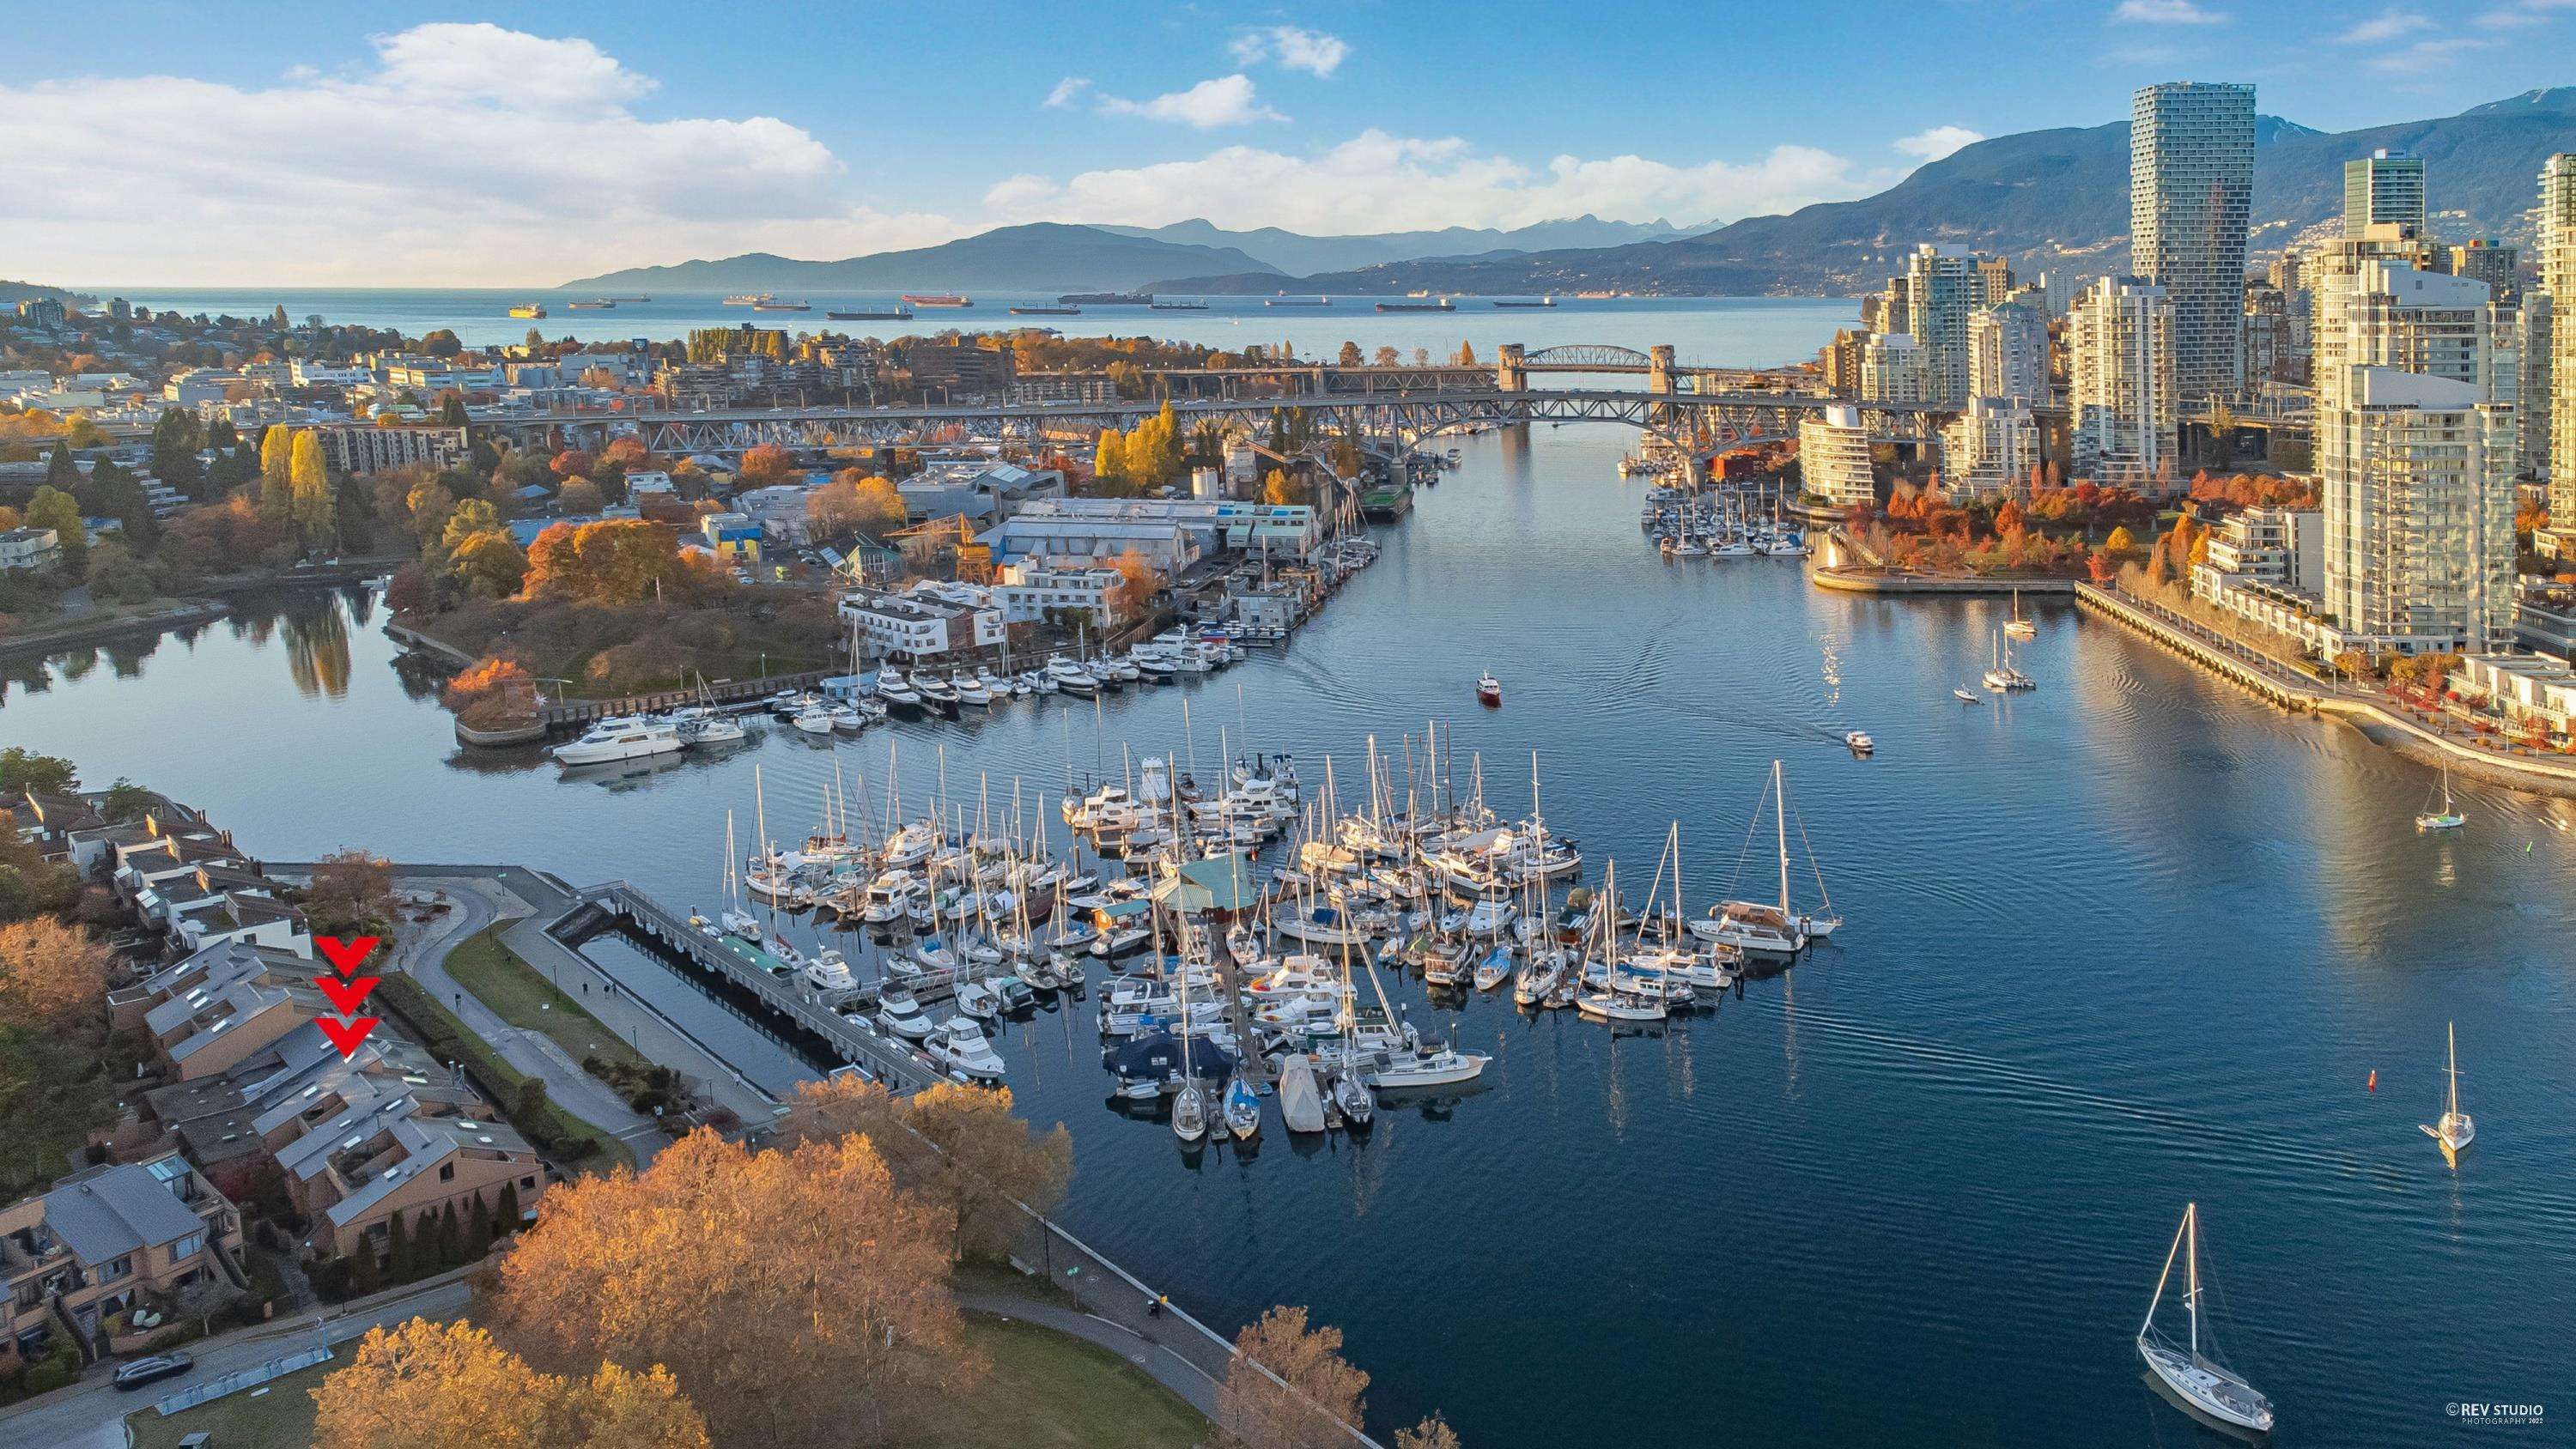 Open House. Open House on Saturday, March 18, 2023 2:00PM - 3:30PM
WATERFRONT TOWNHOUSE w/ stunning water, marina, cityscape and mtn views. 180 degree views W out to English Bay sunsets and E to the Cambie St. Bridge sunrises. Renovation by Colbrone Archi